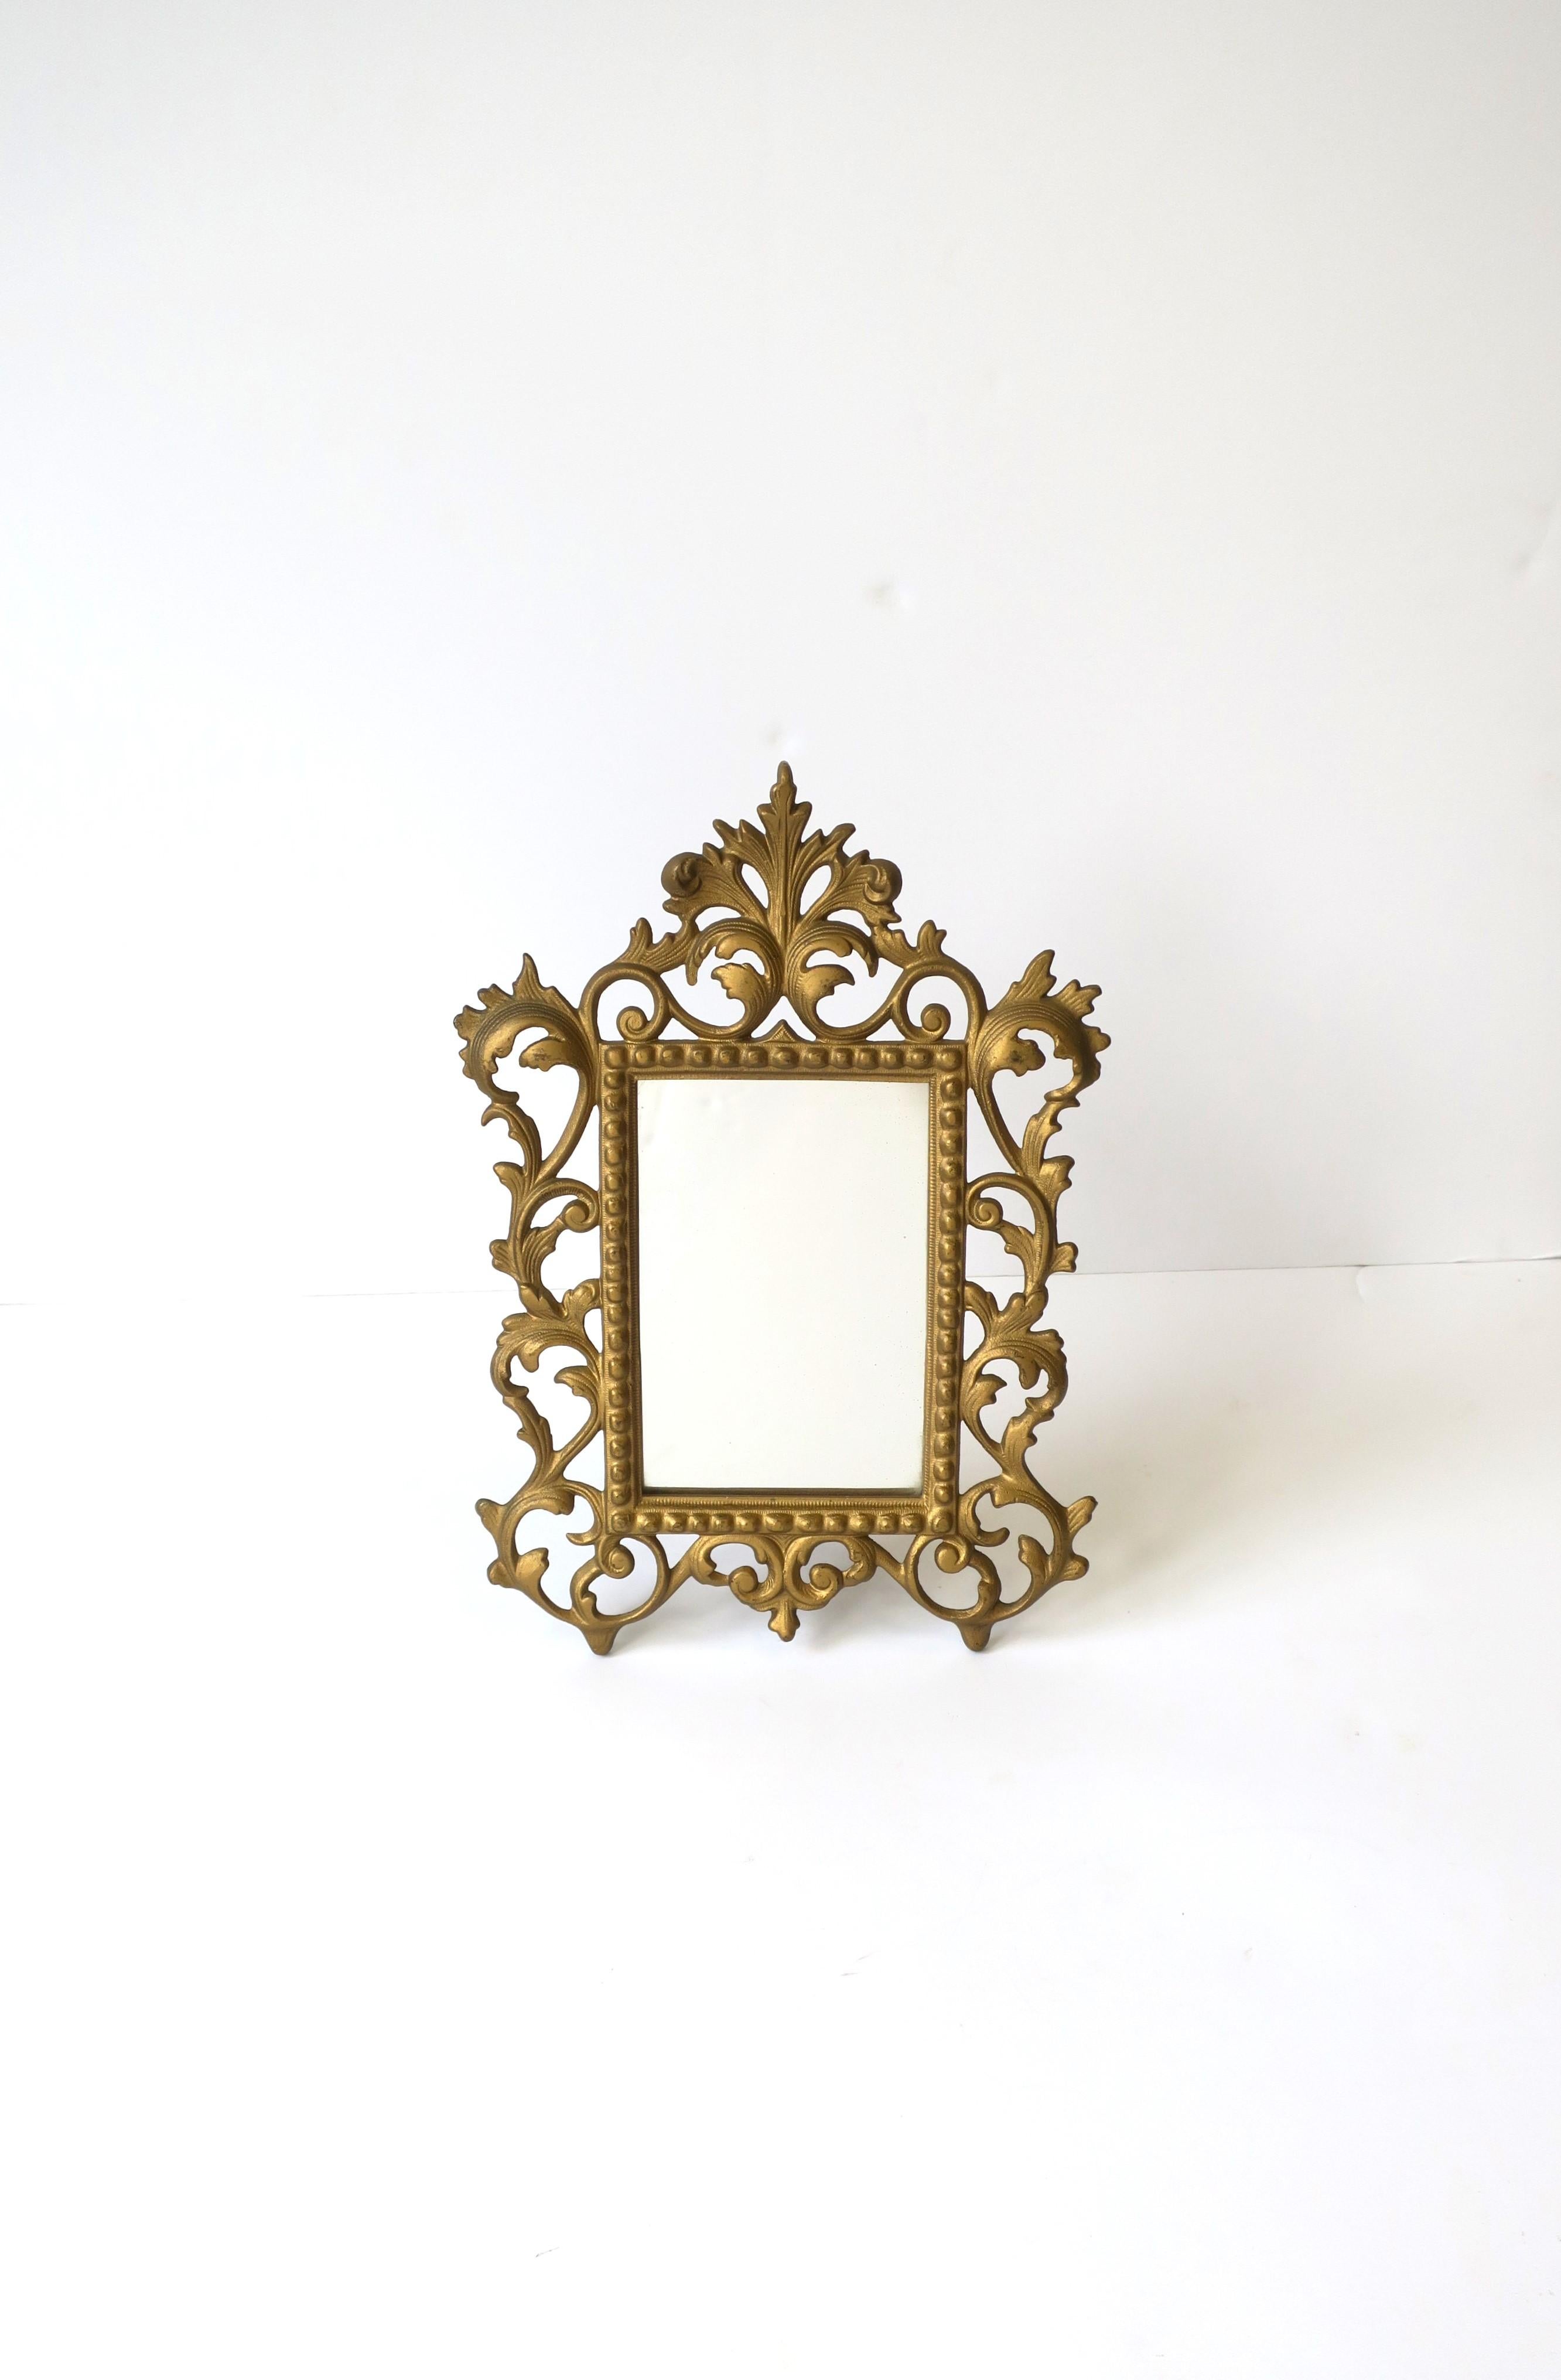 A beautiful antique brass Victorian period table mirror or picture frame, circa early-20th century. Glass is inset into frame, and easily removable to clean. Picture area dimensions: 3.75